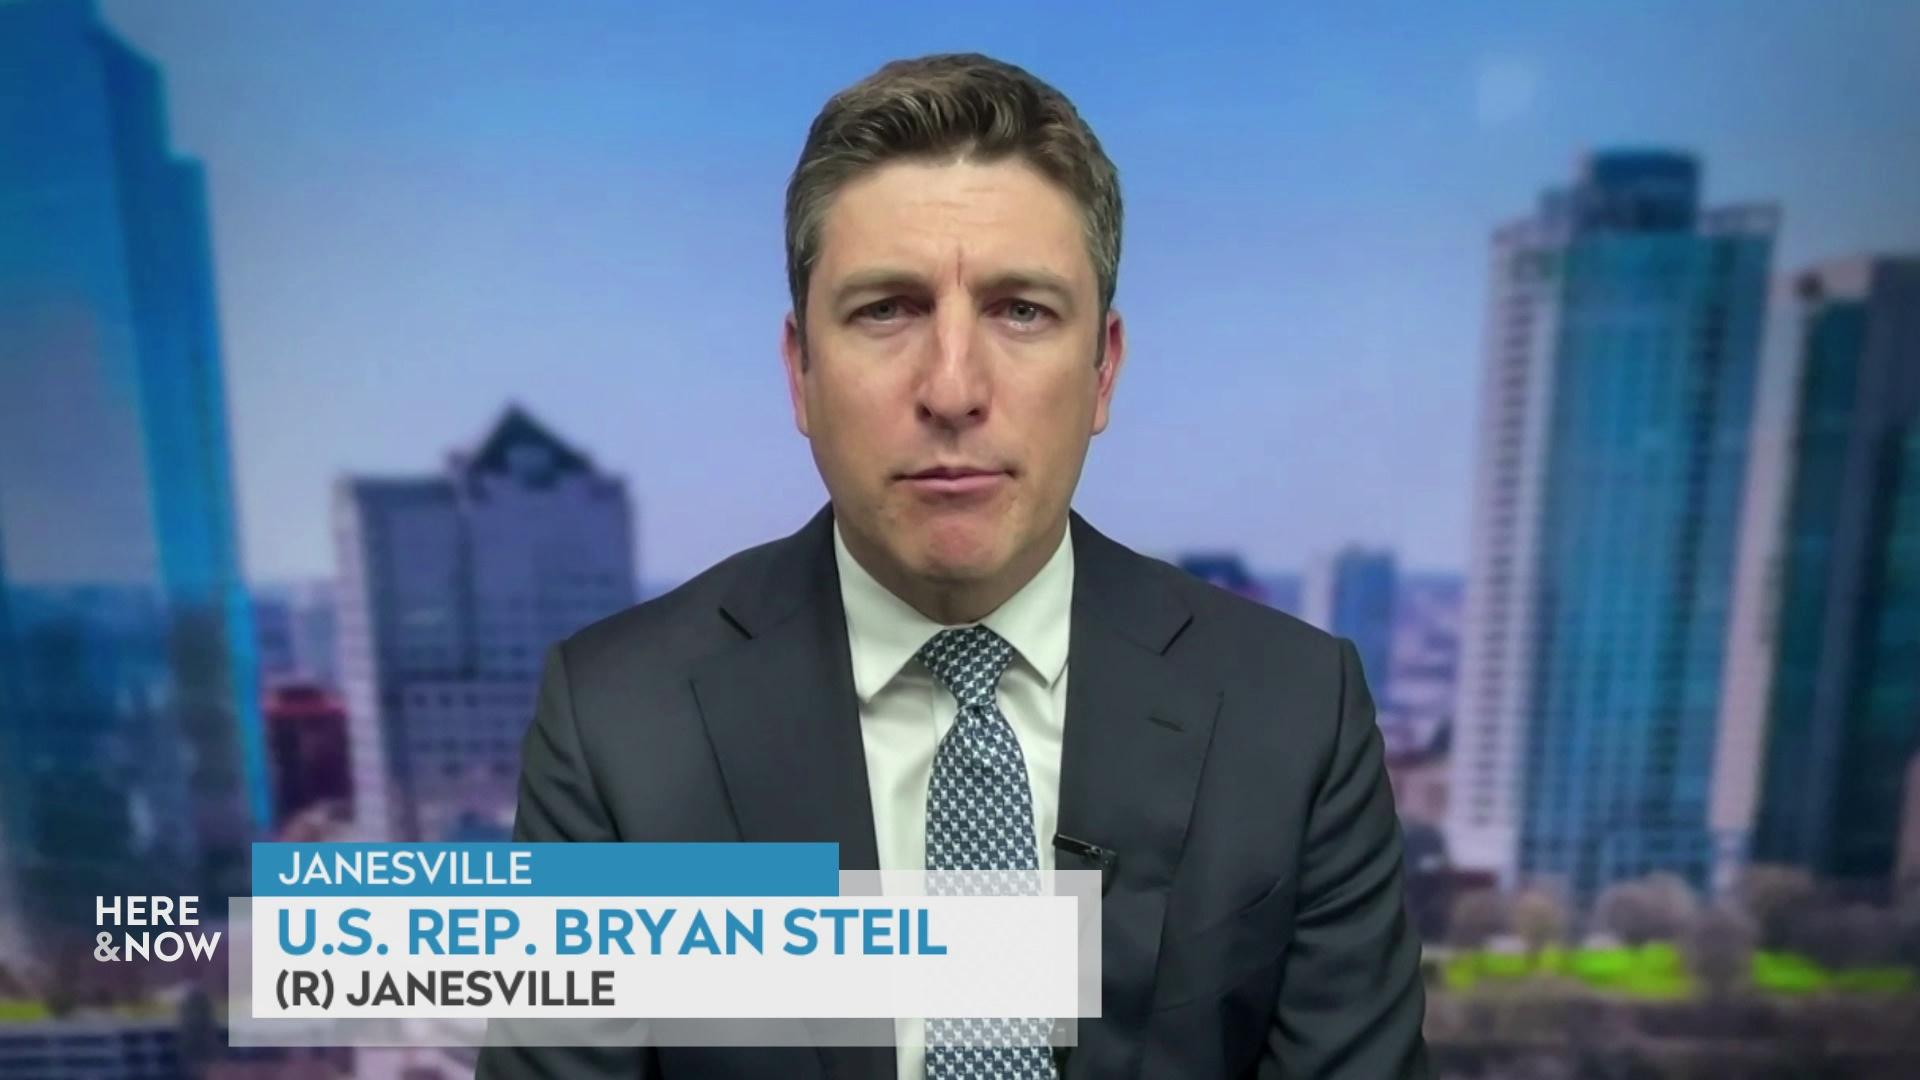 A still image from a video shows Bryan Steil seated in front of a cityscape filter background with a graphic at bottom reading 'Janesville,' 'Bryan Steil' and '(R) Janesville.'